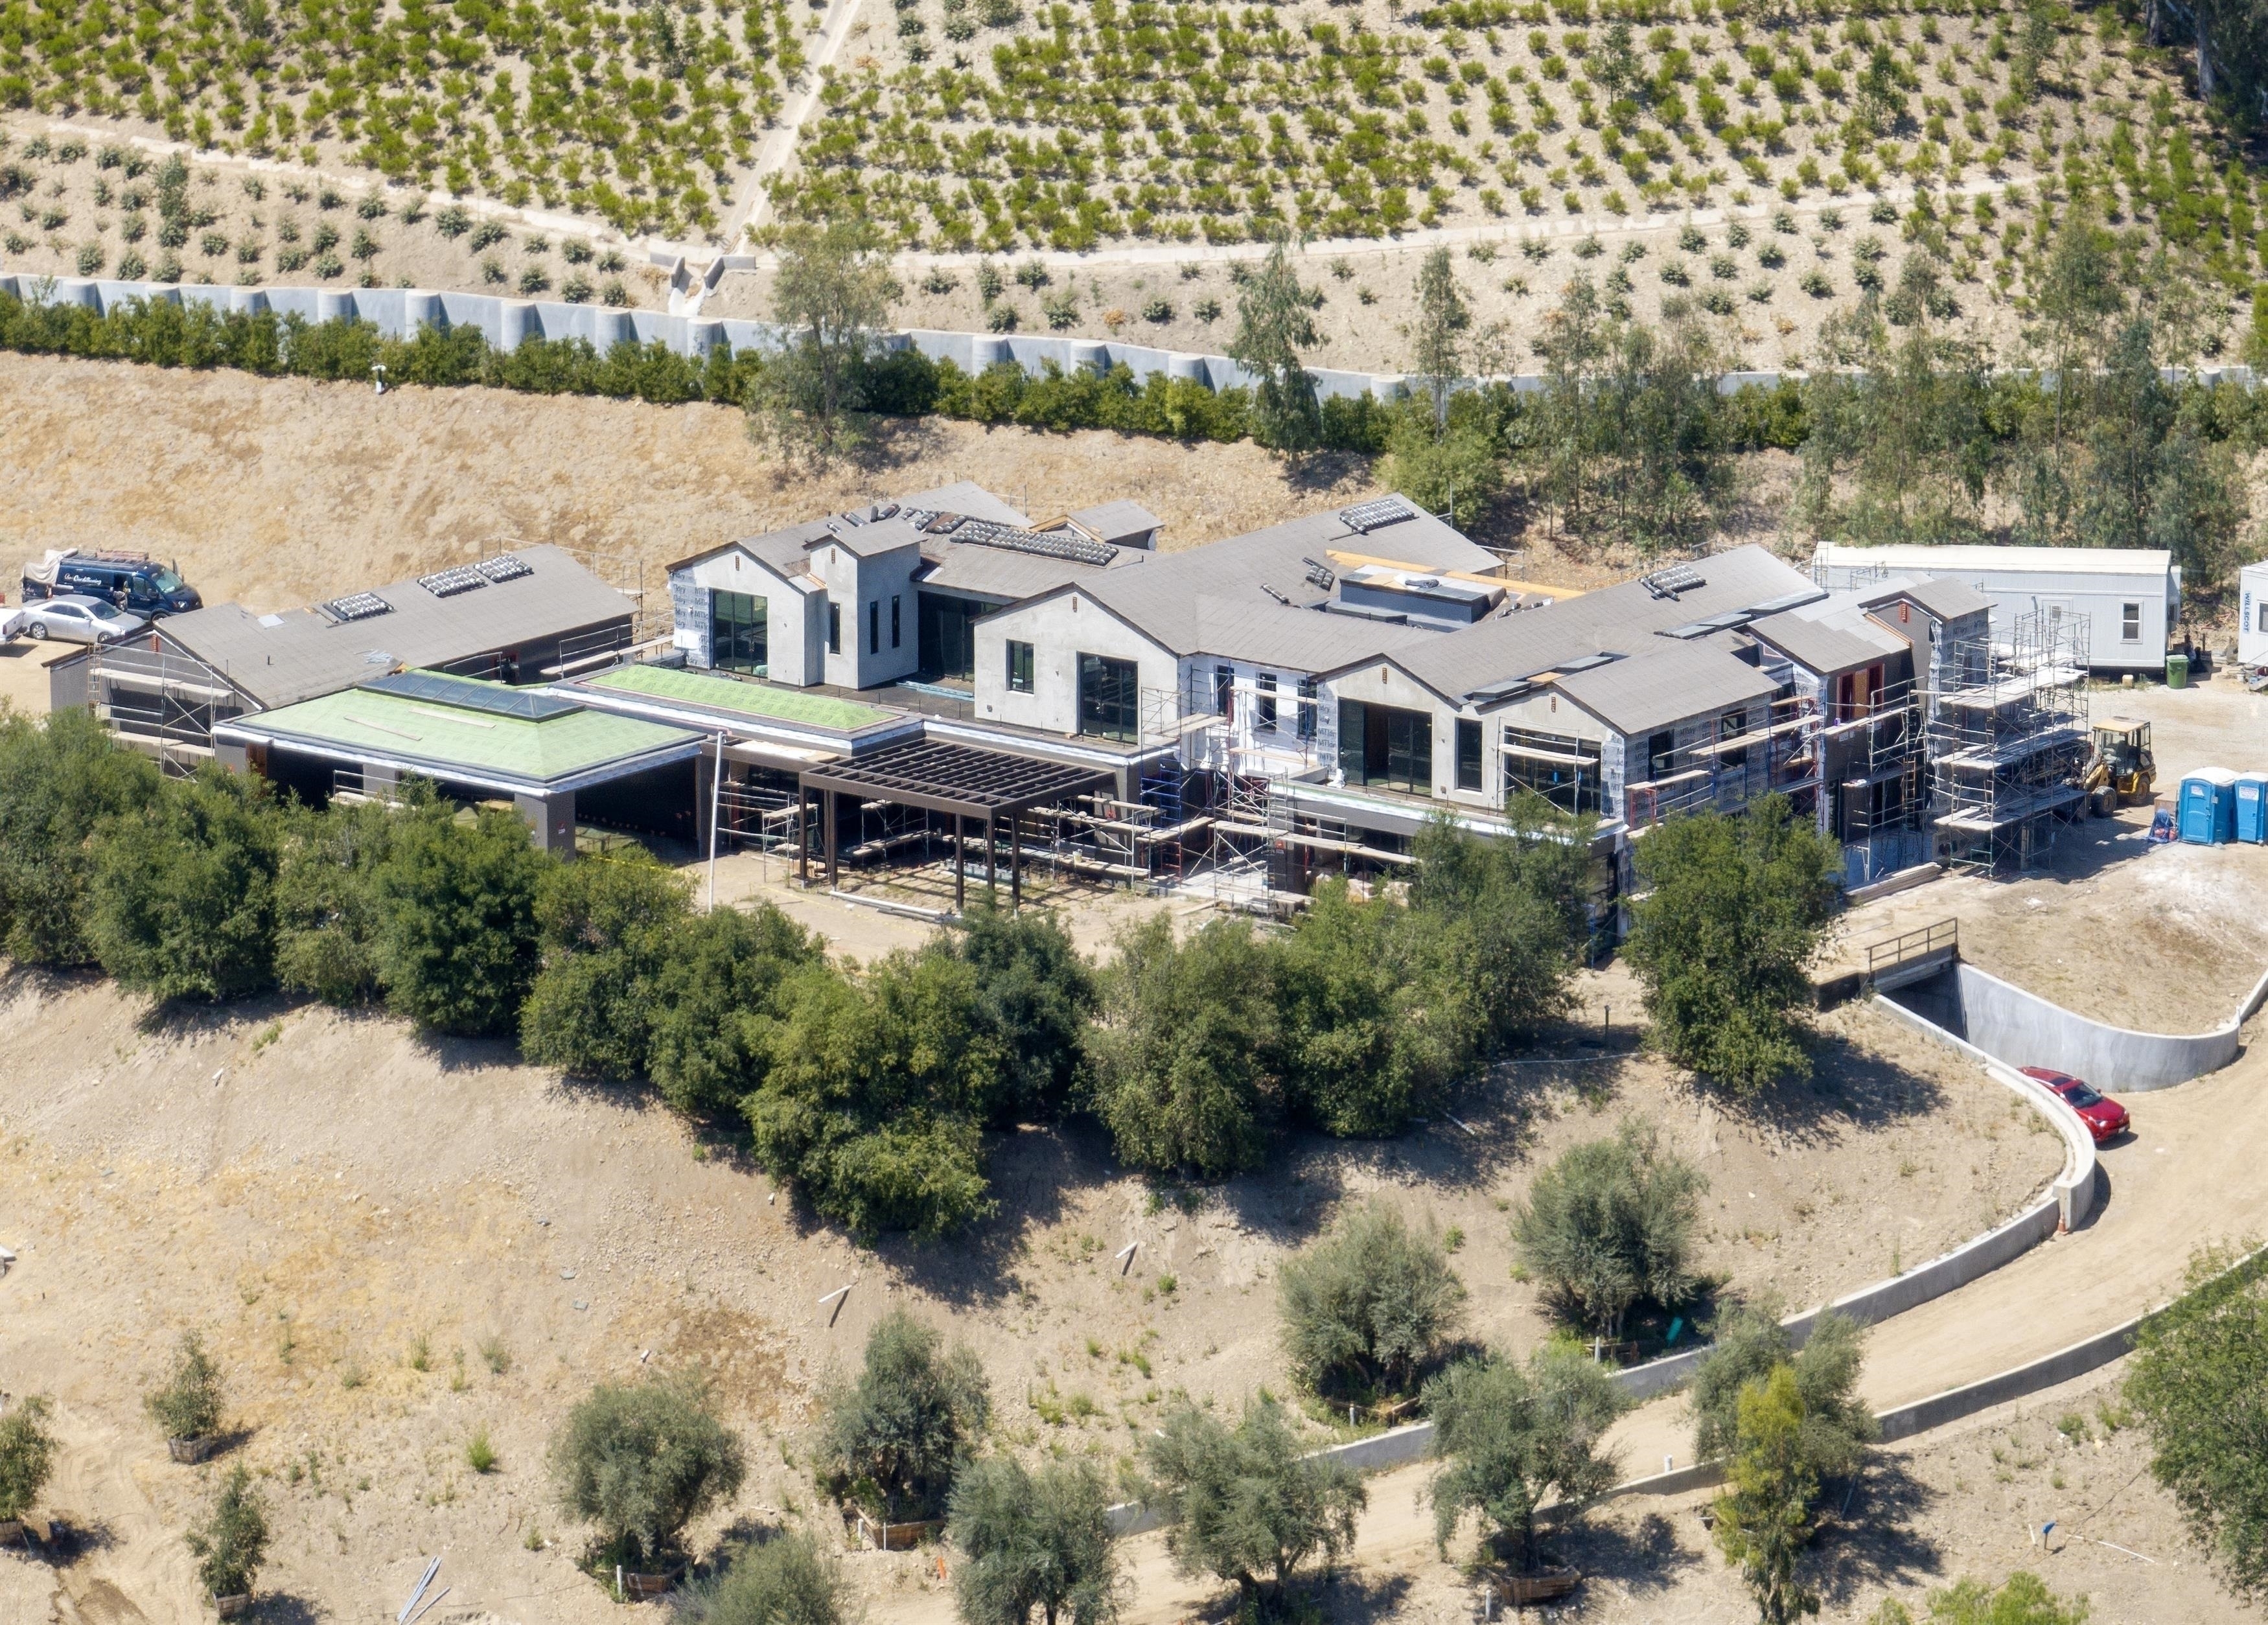 Kylie Jenner's home is reported to have 15 bedrooms and an underground bunker